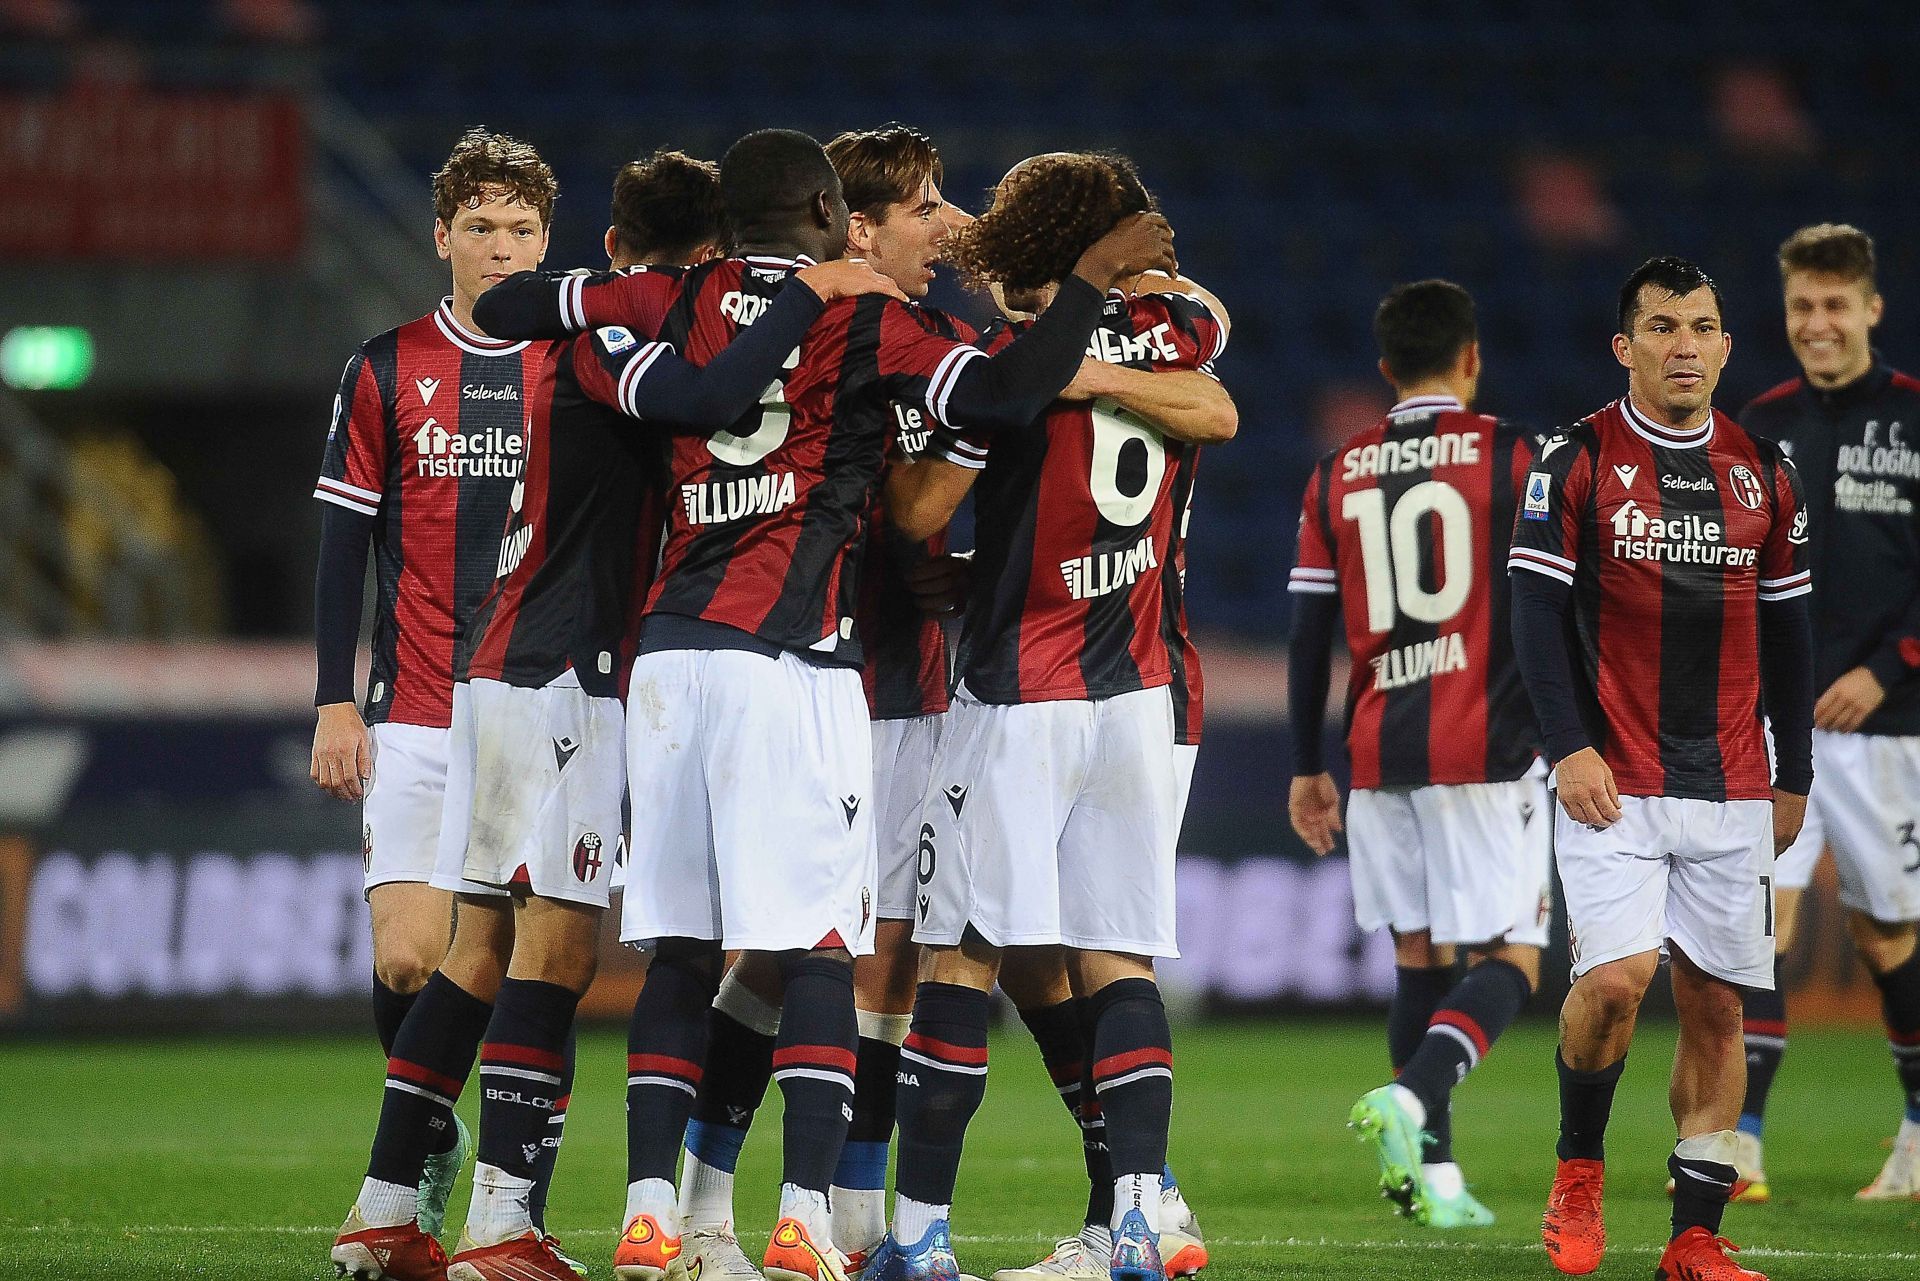 Bologna will be looking to extend their winning streak in Serie A on Sunday